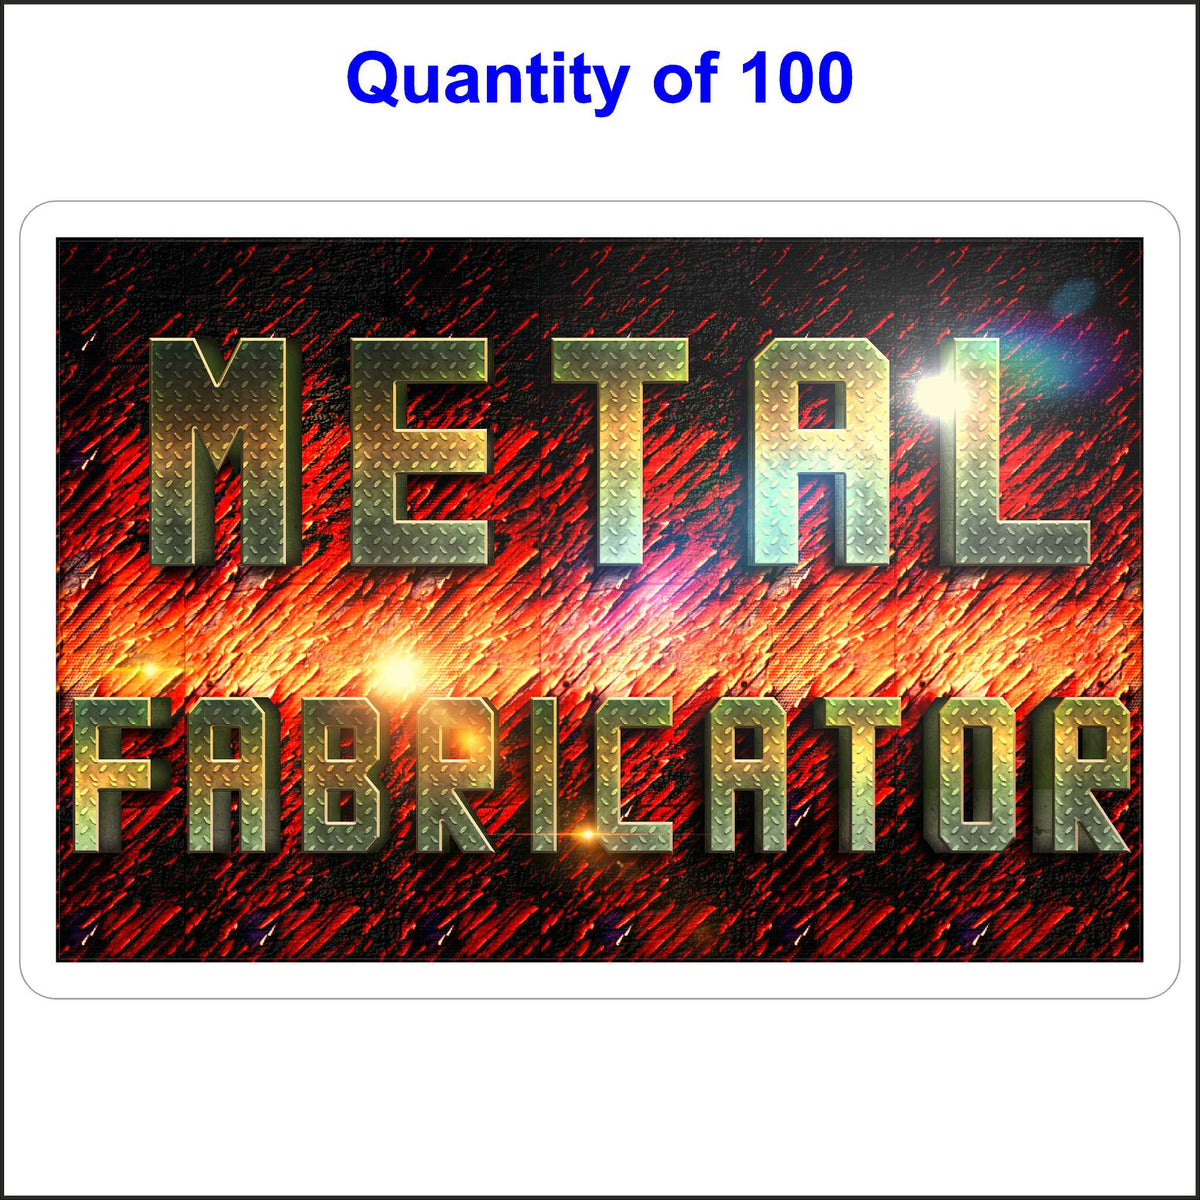 100 Quantity of This Metal Fabricator Sticker. Printed in Full Color and Shows the Text on a Diamond Plate and the Background in Colorful Etched Metal.